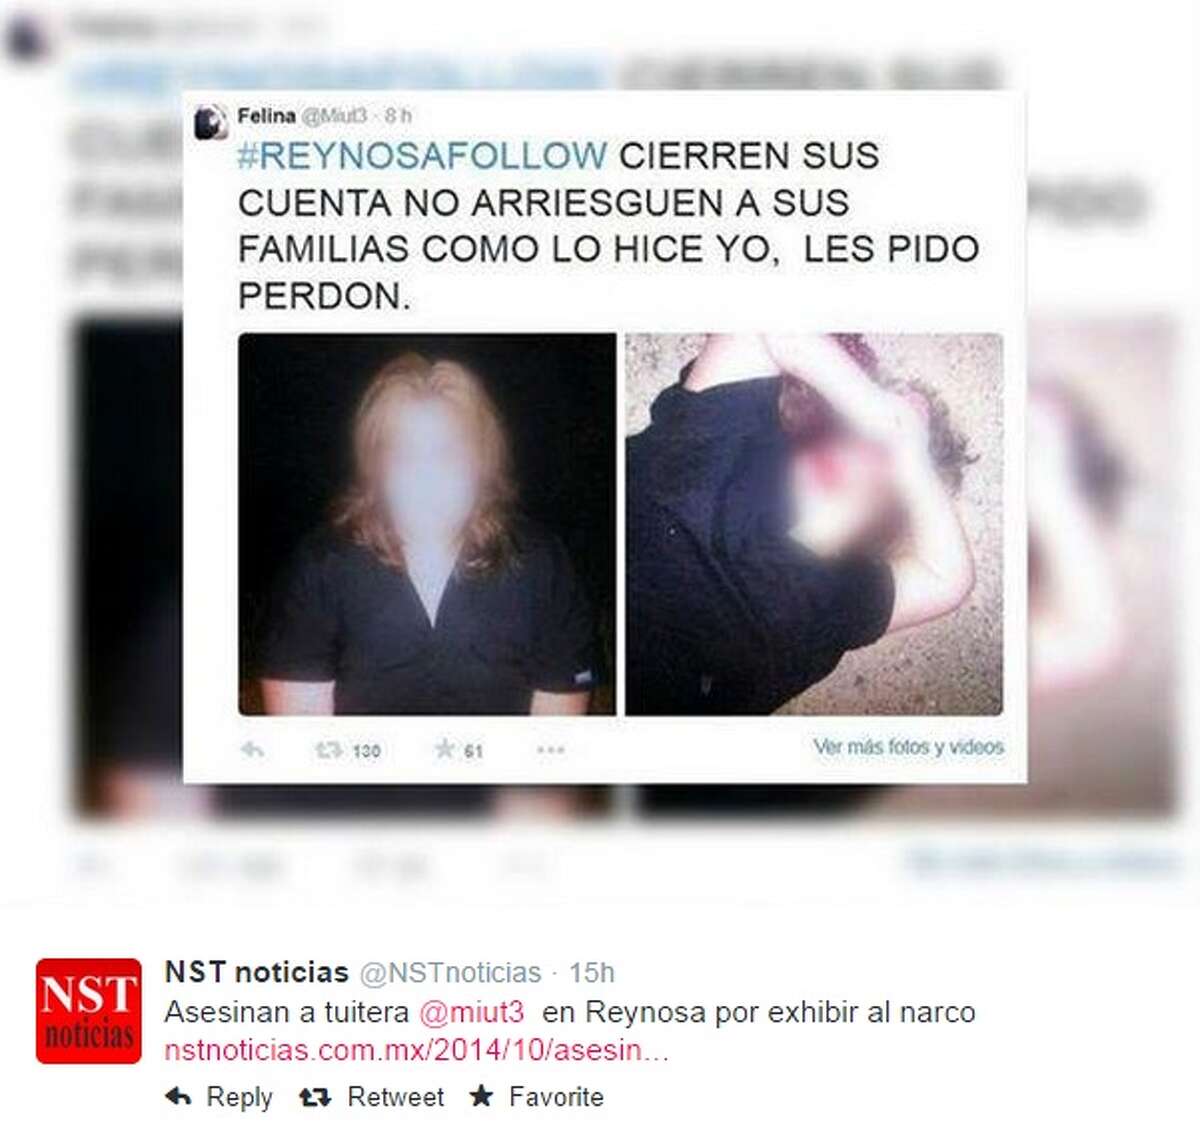 The Twitter account associated with María del Rosario Fuentes Rubio, @Miut3, was hacked by her kidnappers, later Tweeting a photo of a bloody, lifeless body on Thursday morning. The status that accompanied the photo suggested people close their accounts in order to protect the lives of their families.